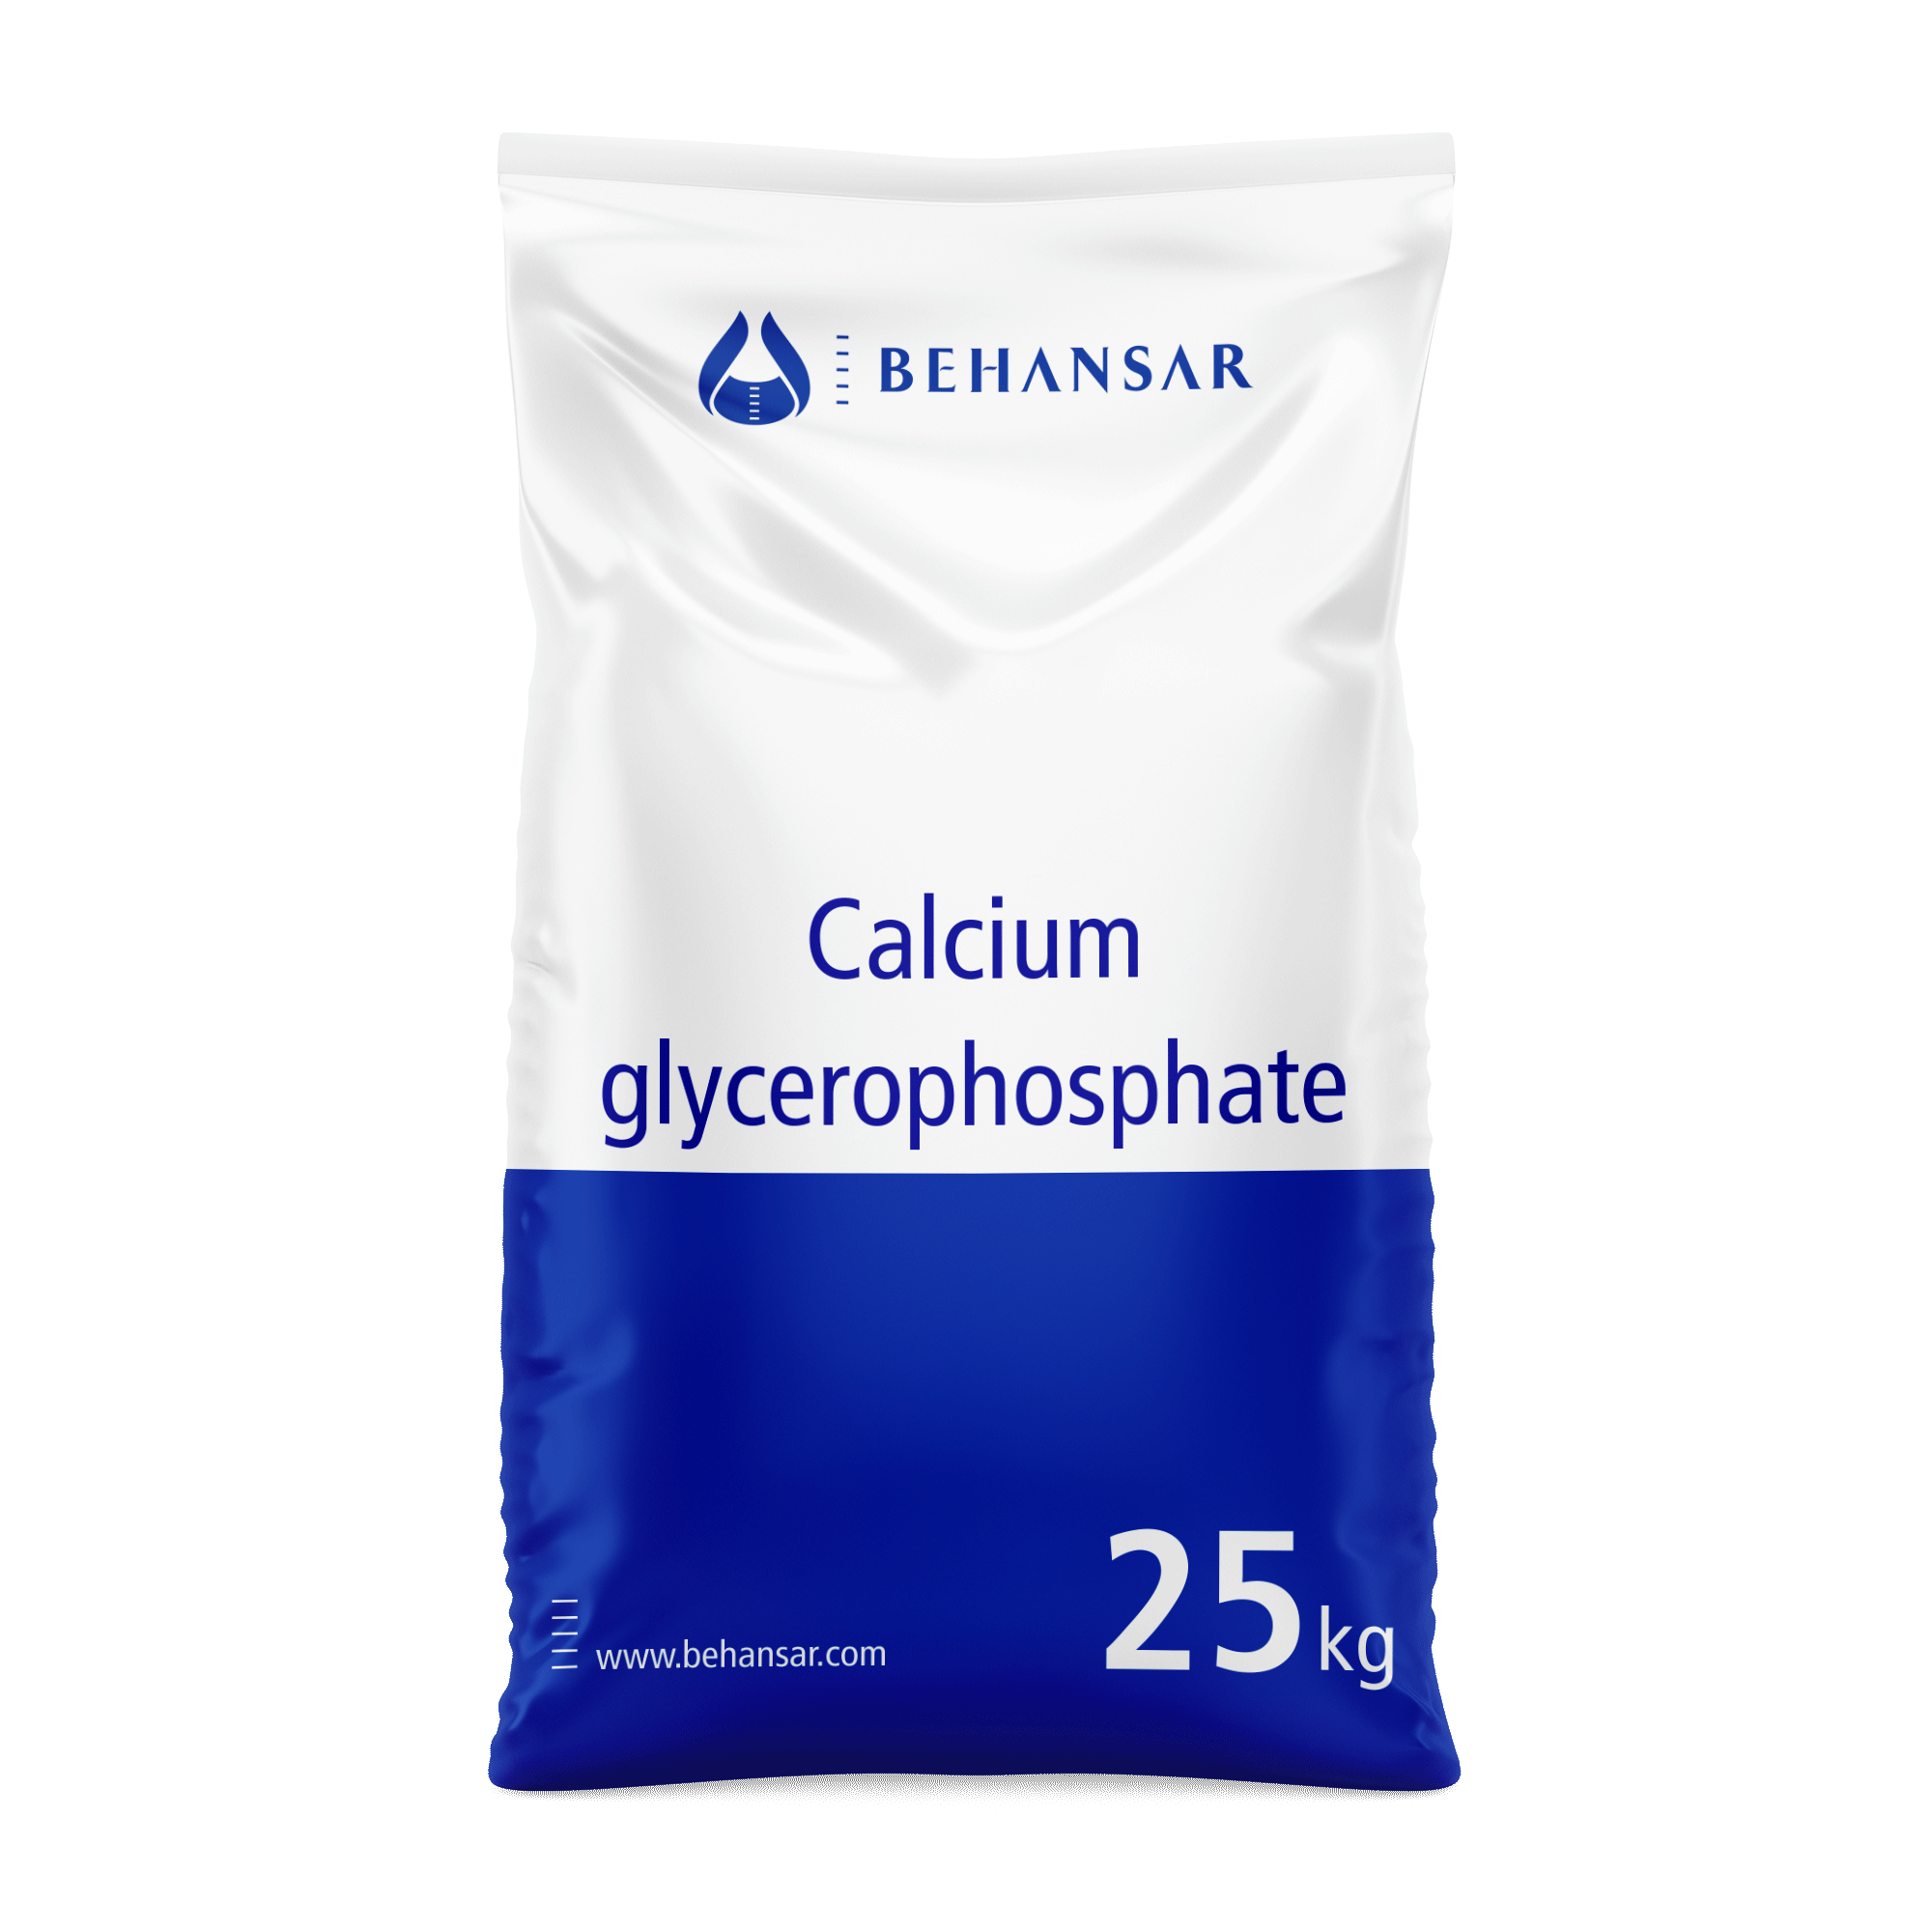 Calcium glycerophosphate is one of the products of Behansar Co